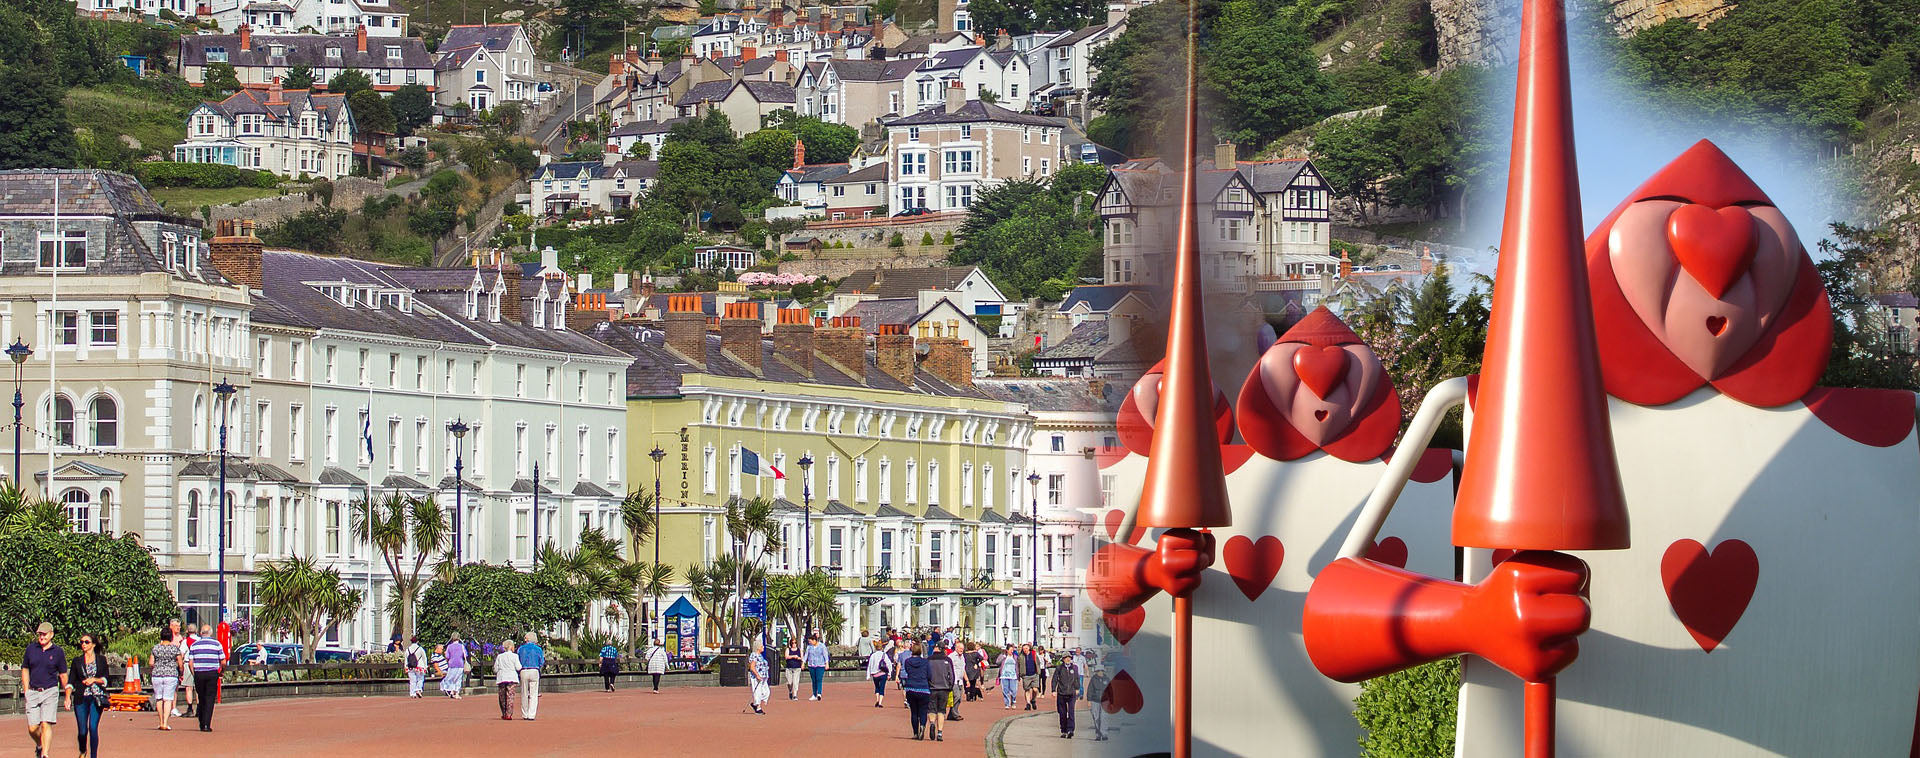 Quirky Treasure Trails - Don't be late to investigate - explore Llandudno to seek the inspiration for Alice in Wonderland...